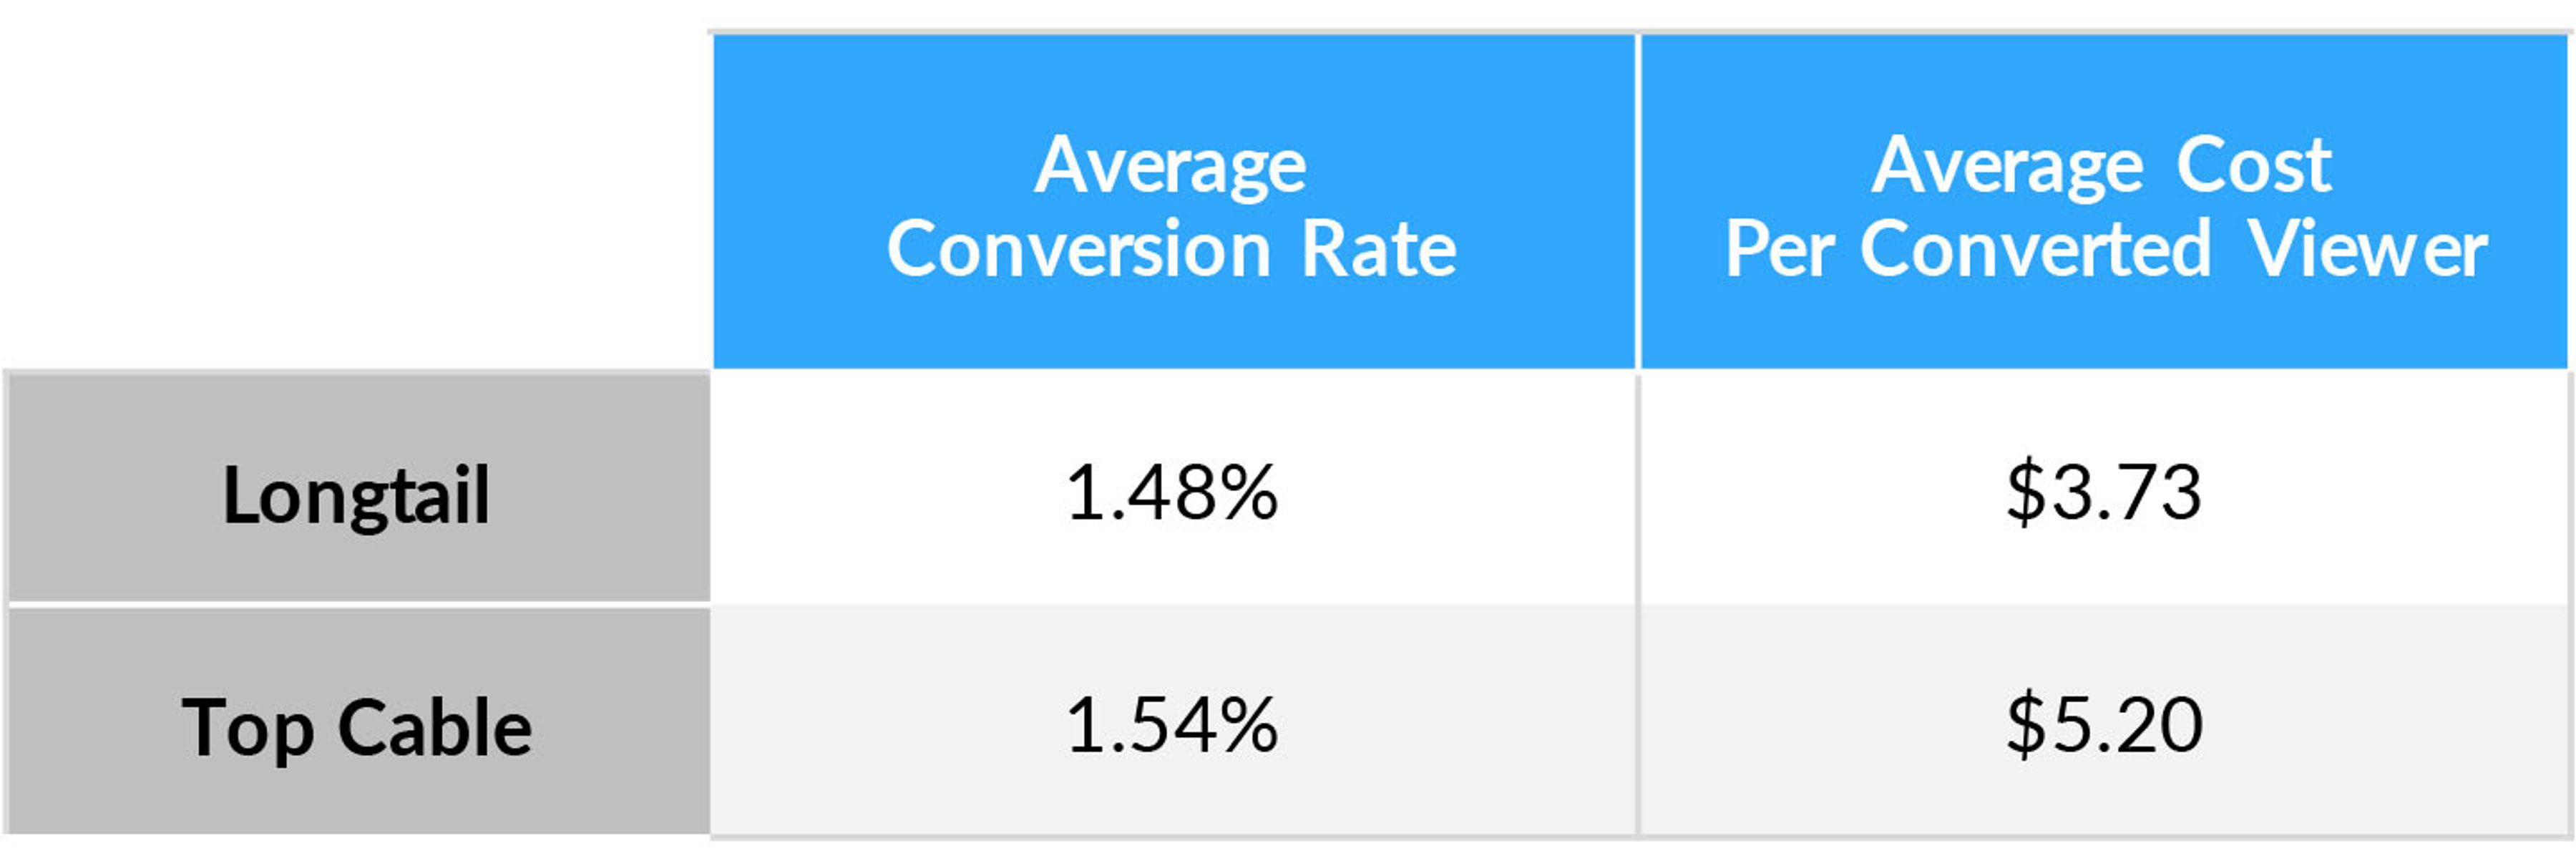 Table showing average conversion rate comparison between longtail and top cable TV advertising.